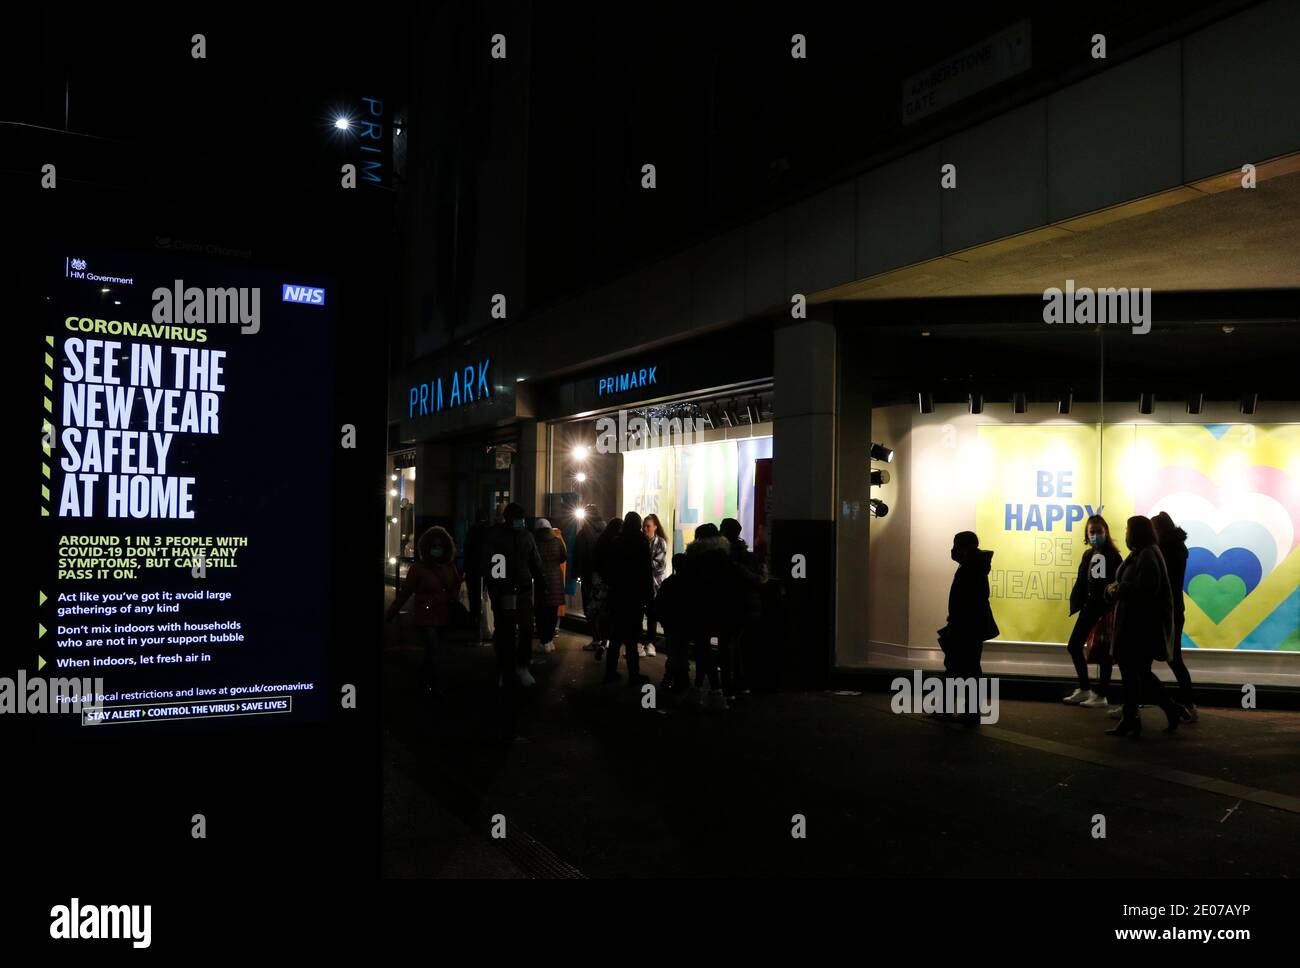 Leicester, Leicestershire, UK. 30th December 2020. Shoppers queue outside a Primark clothes store after it was announced the City would enter tier 4 of coronavirus restrictions.  Credit Darren Staples/Alamy Live News. Stock Photo